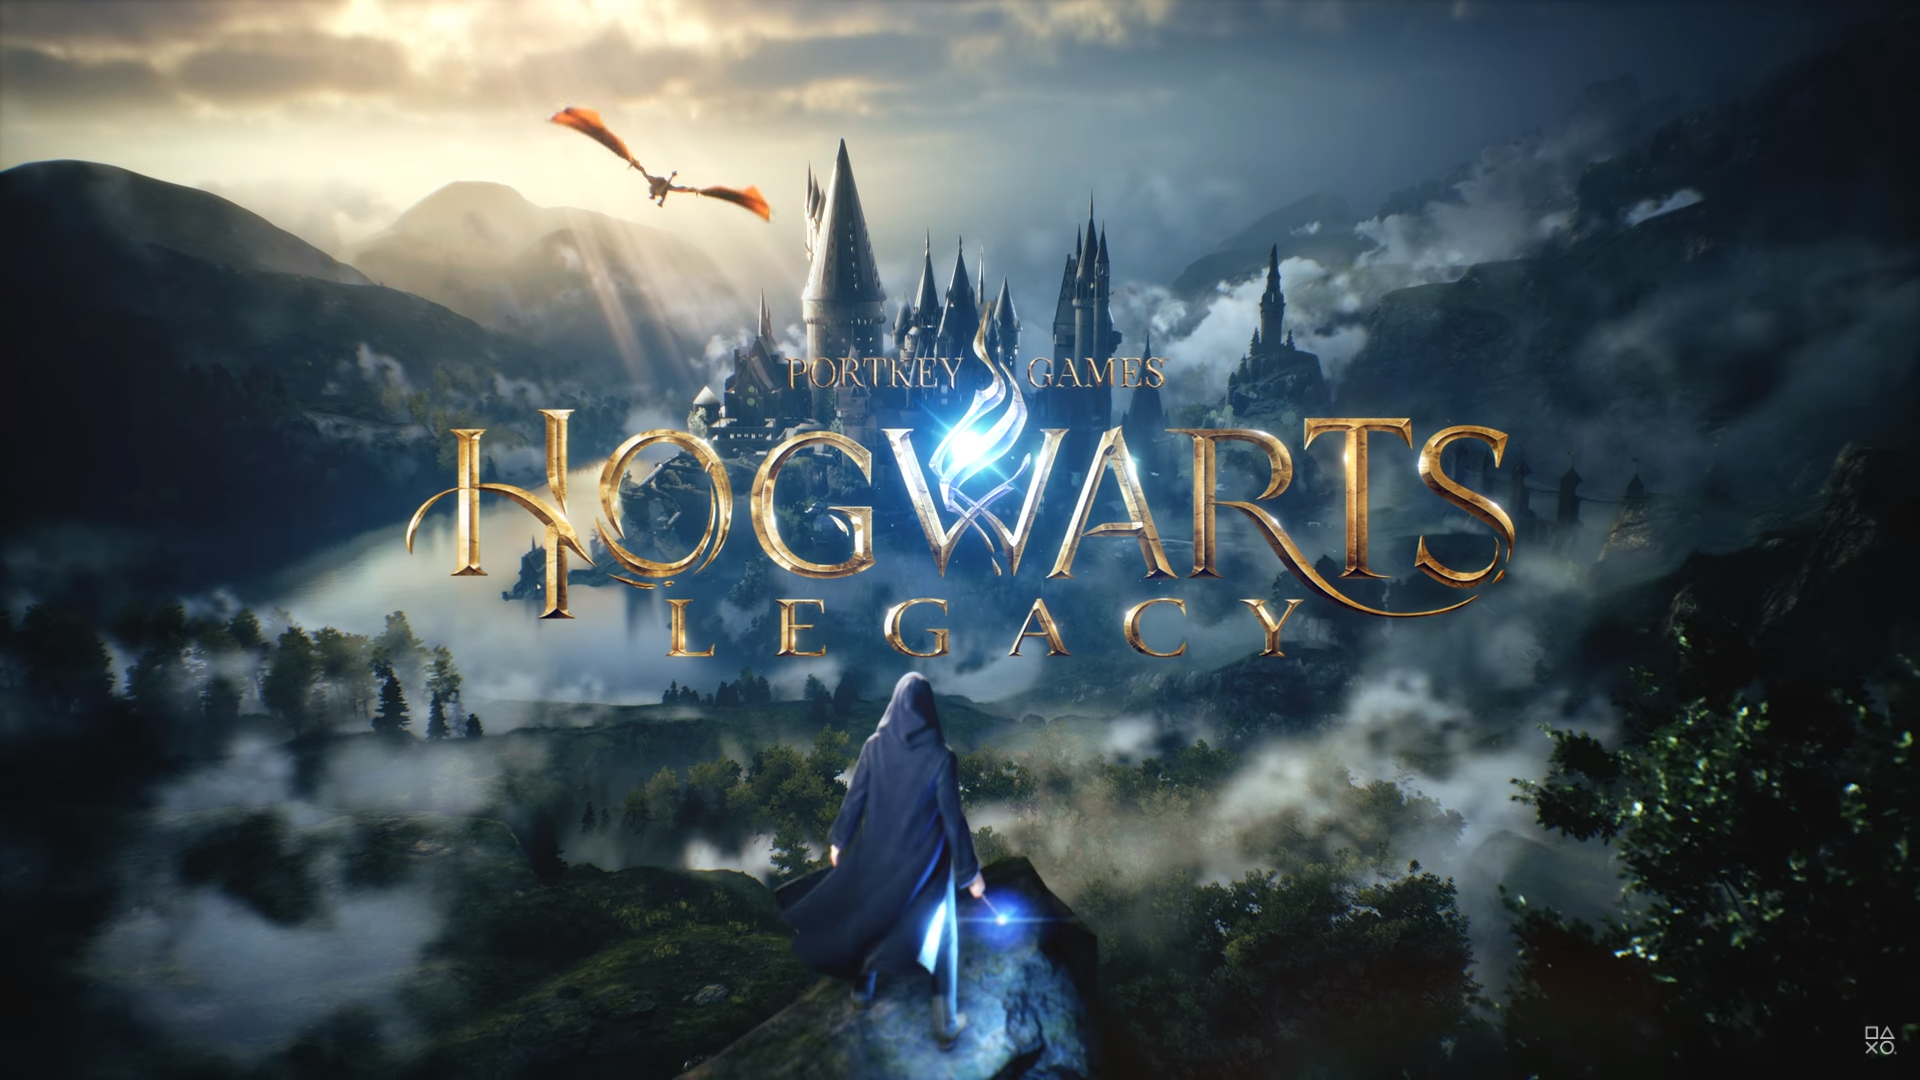 Hogwarts Legacy gets a State-of-Play Presentation on March 17